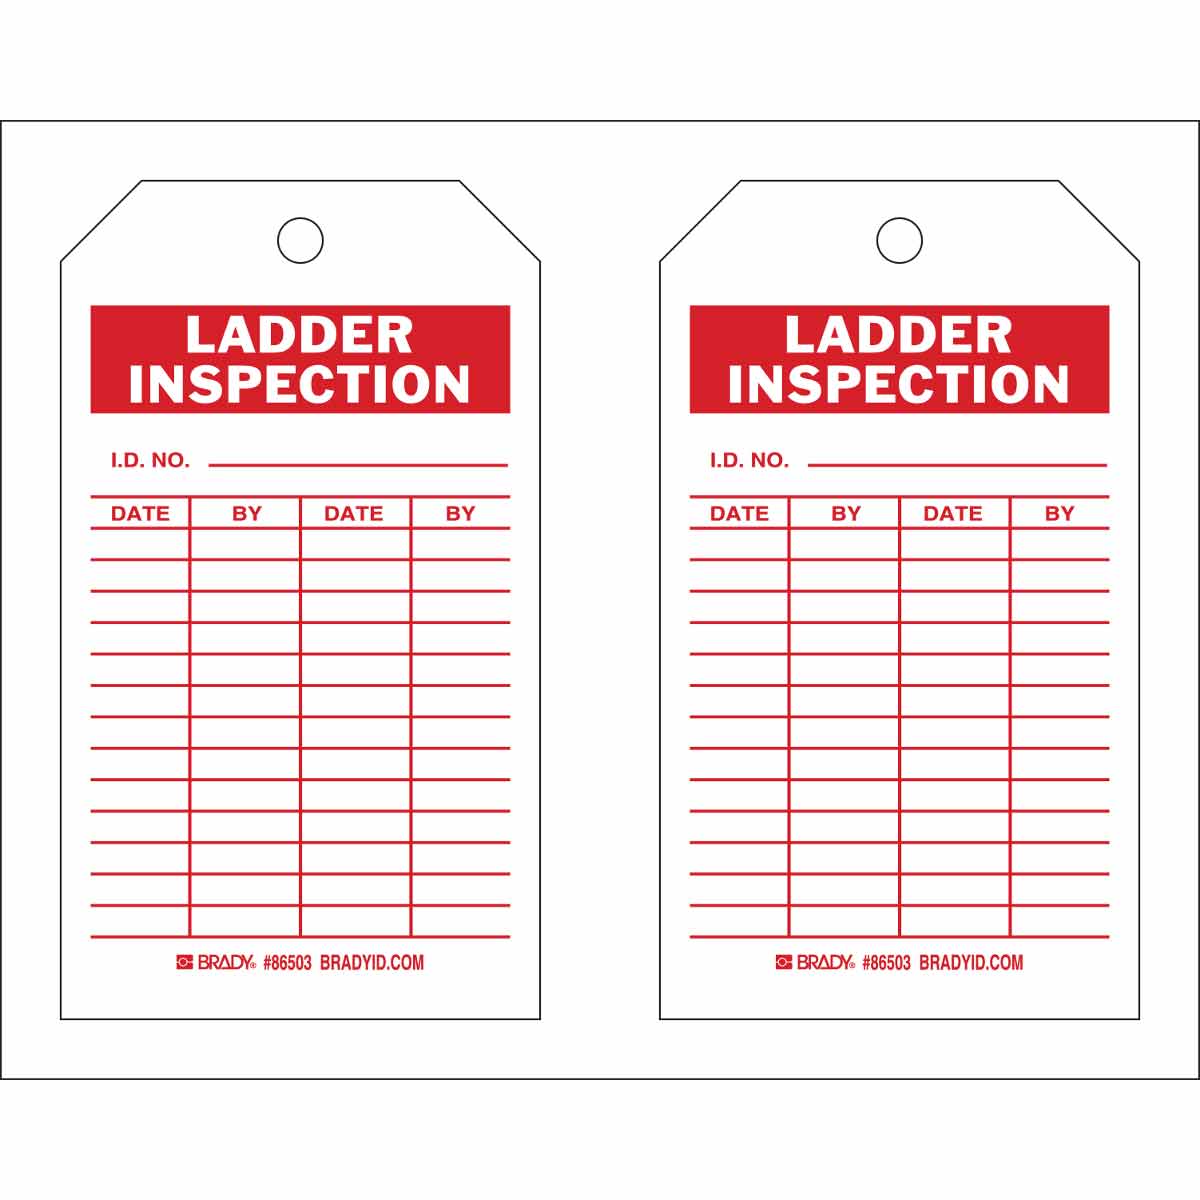 Brady Part 86503 Ladder Inspection Tags